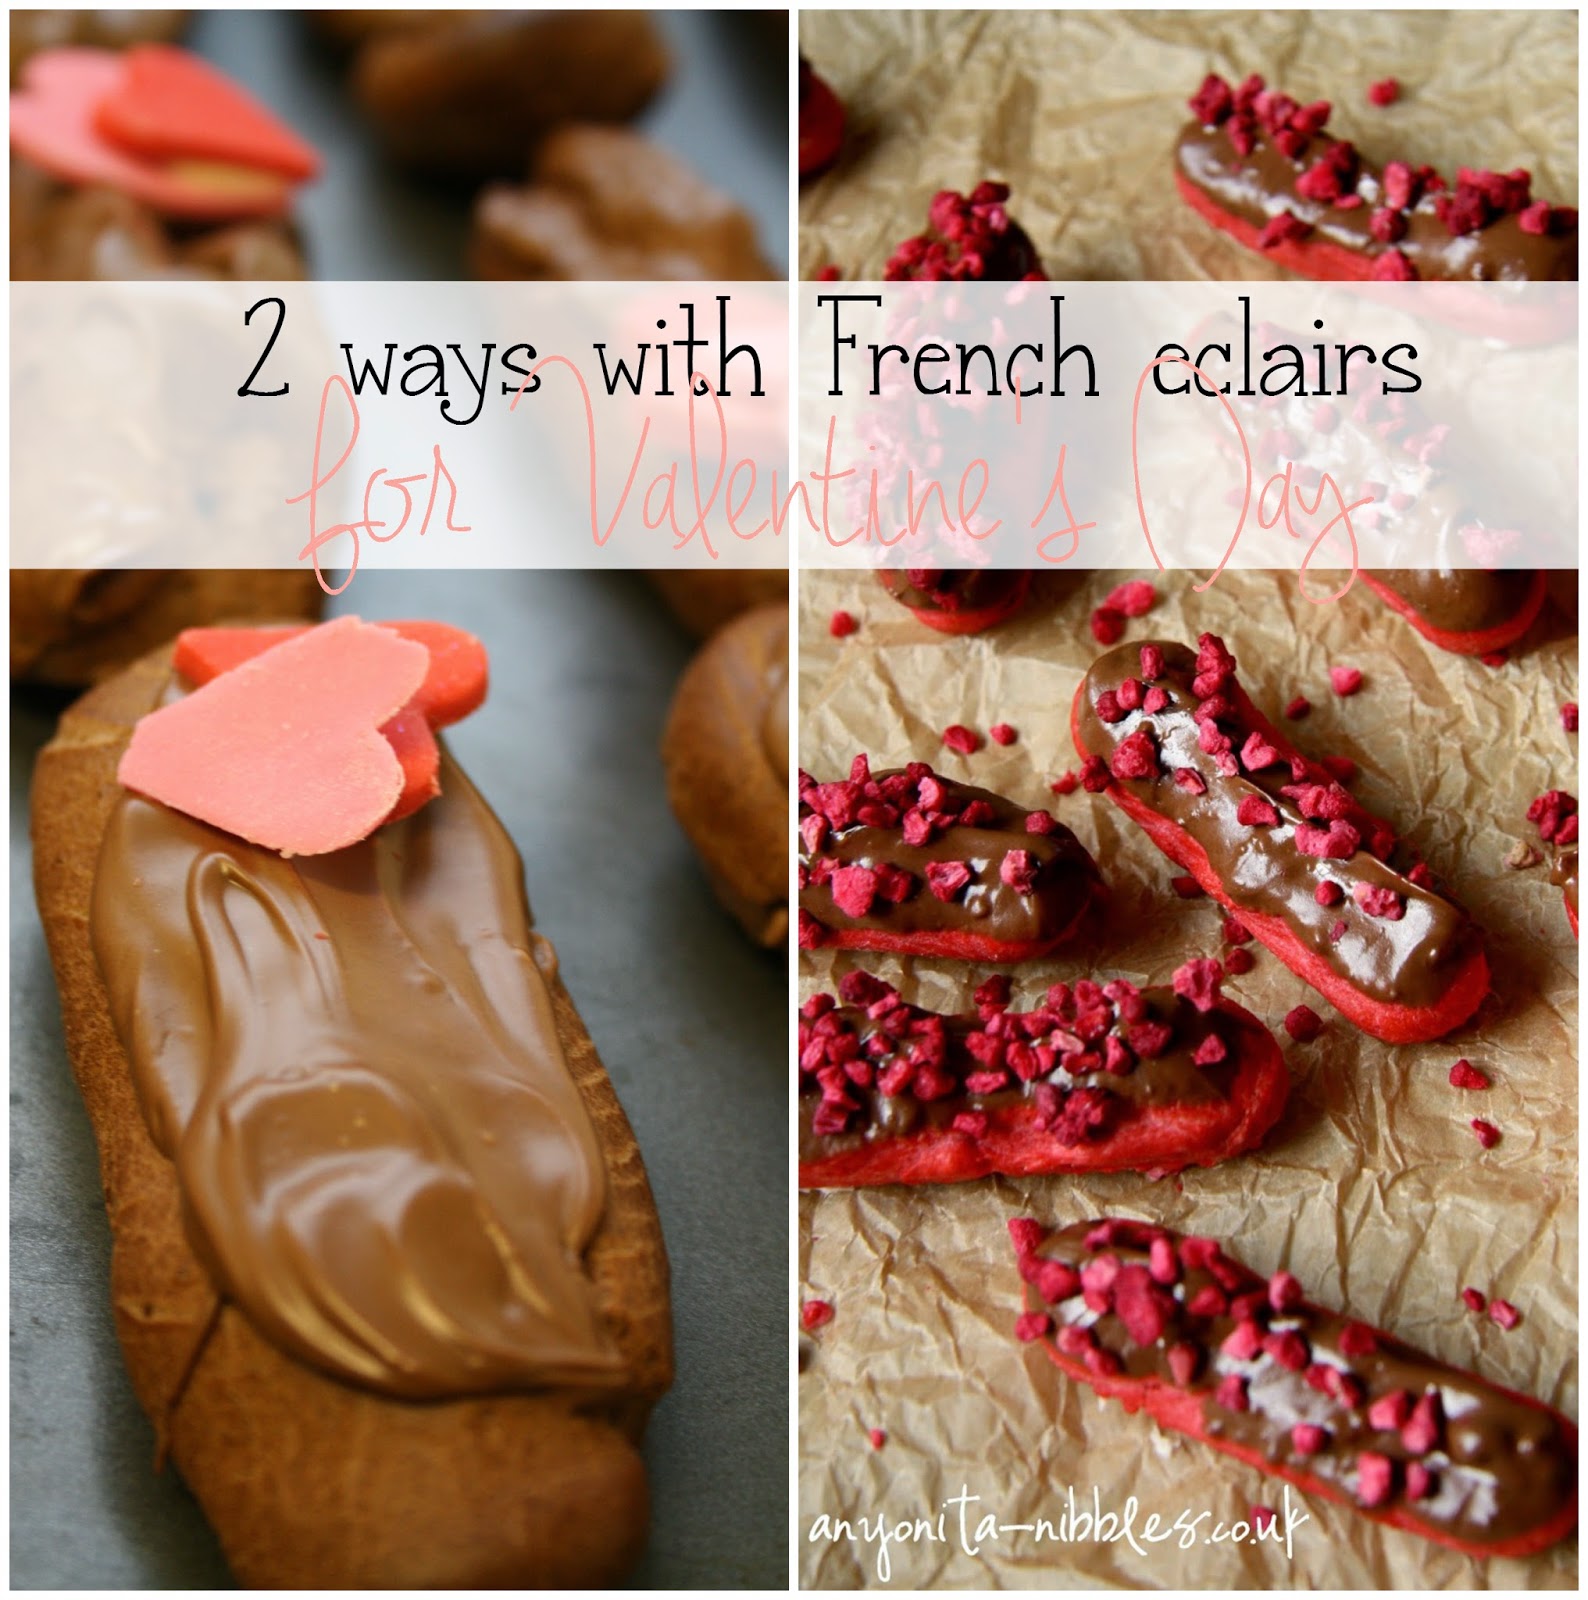 2 Ways with French Eclairs for Valentine's Day from Anyonita-nibbles.co.uk